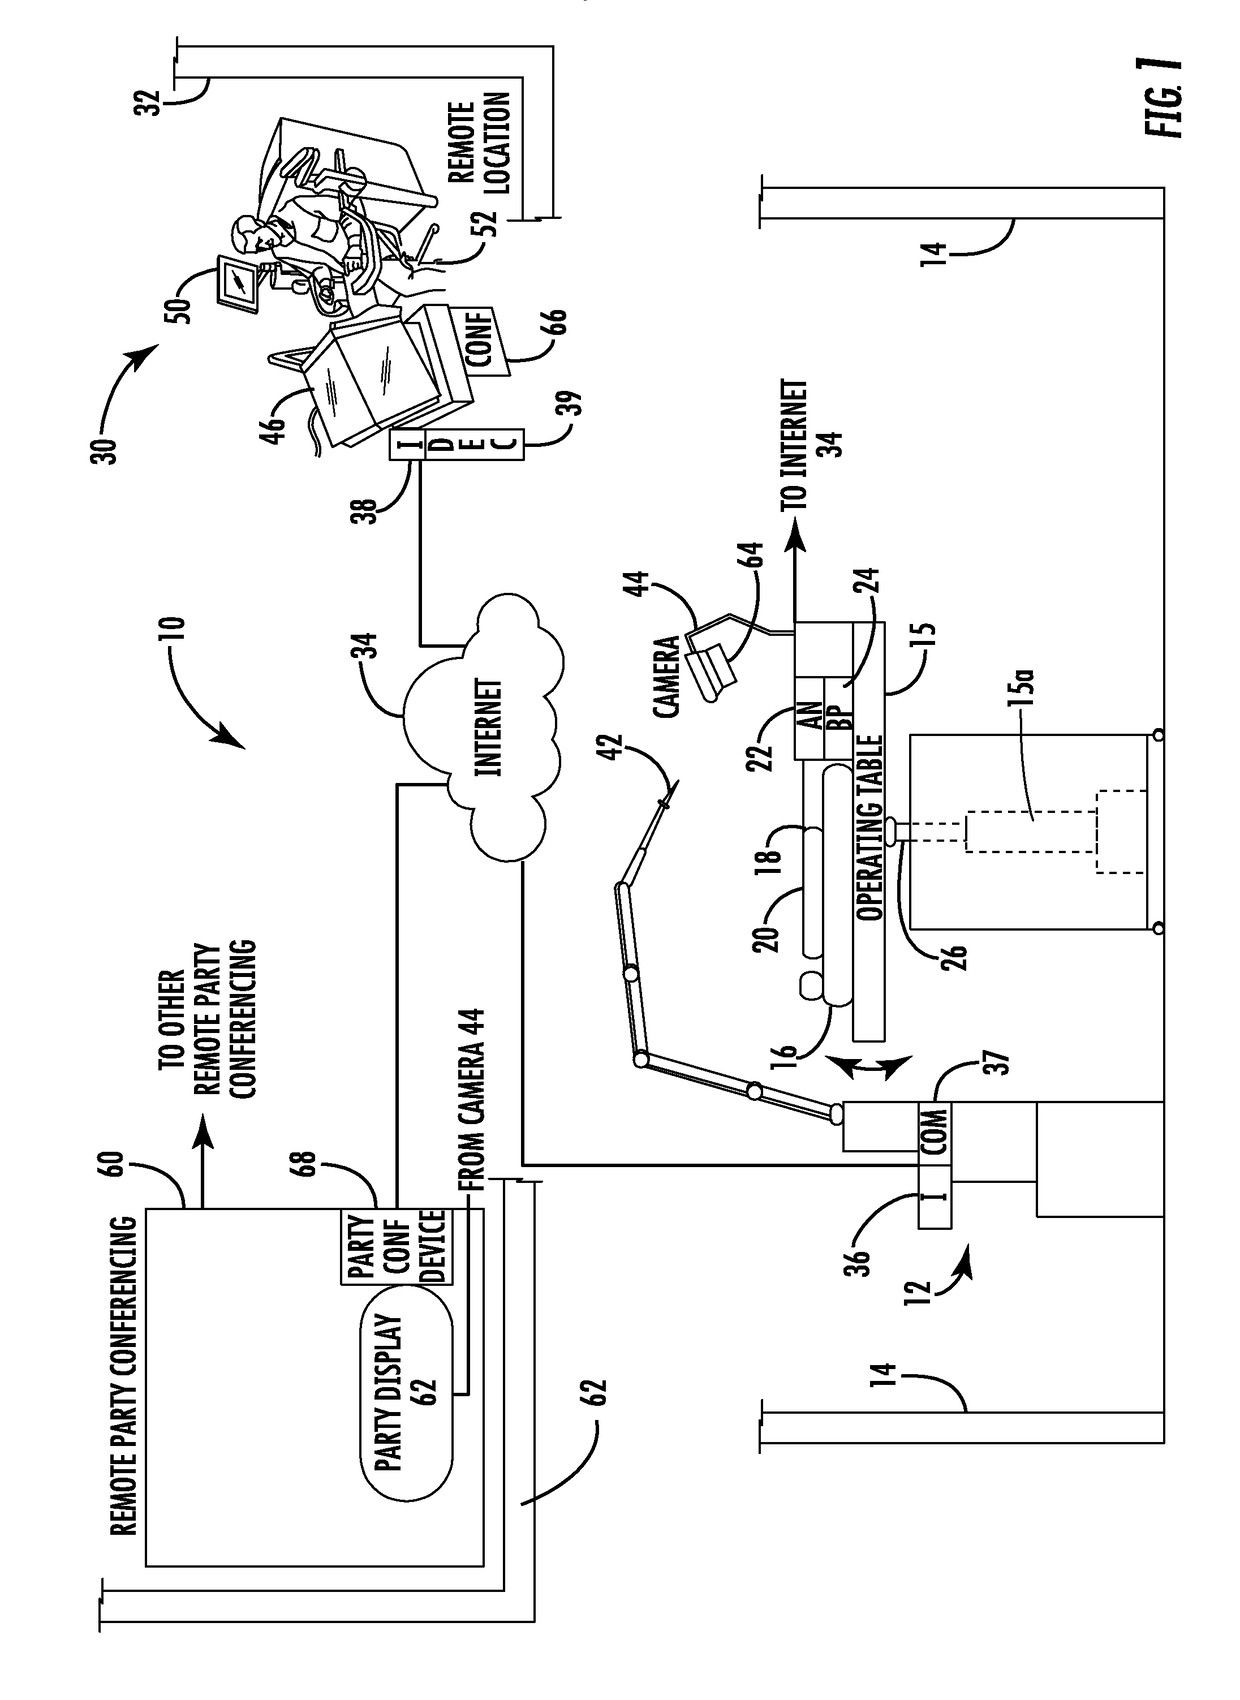 Telerobotic surgery system using minimally invasive surgical tool with variable force scaling and feedback and relayed communications between remote surgeon and surgery station